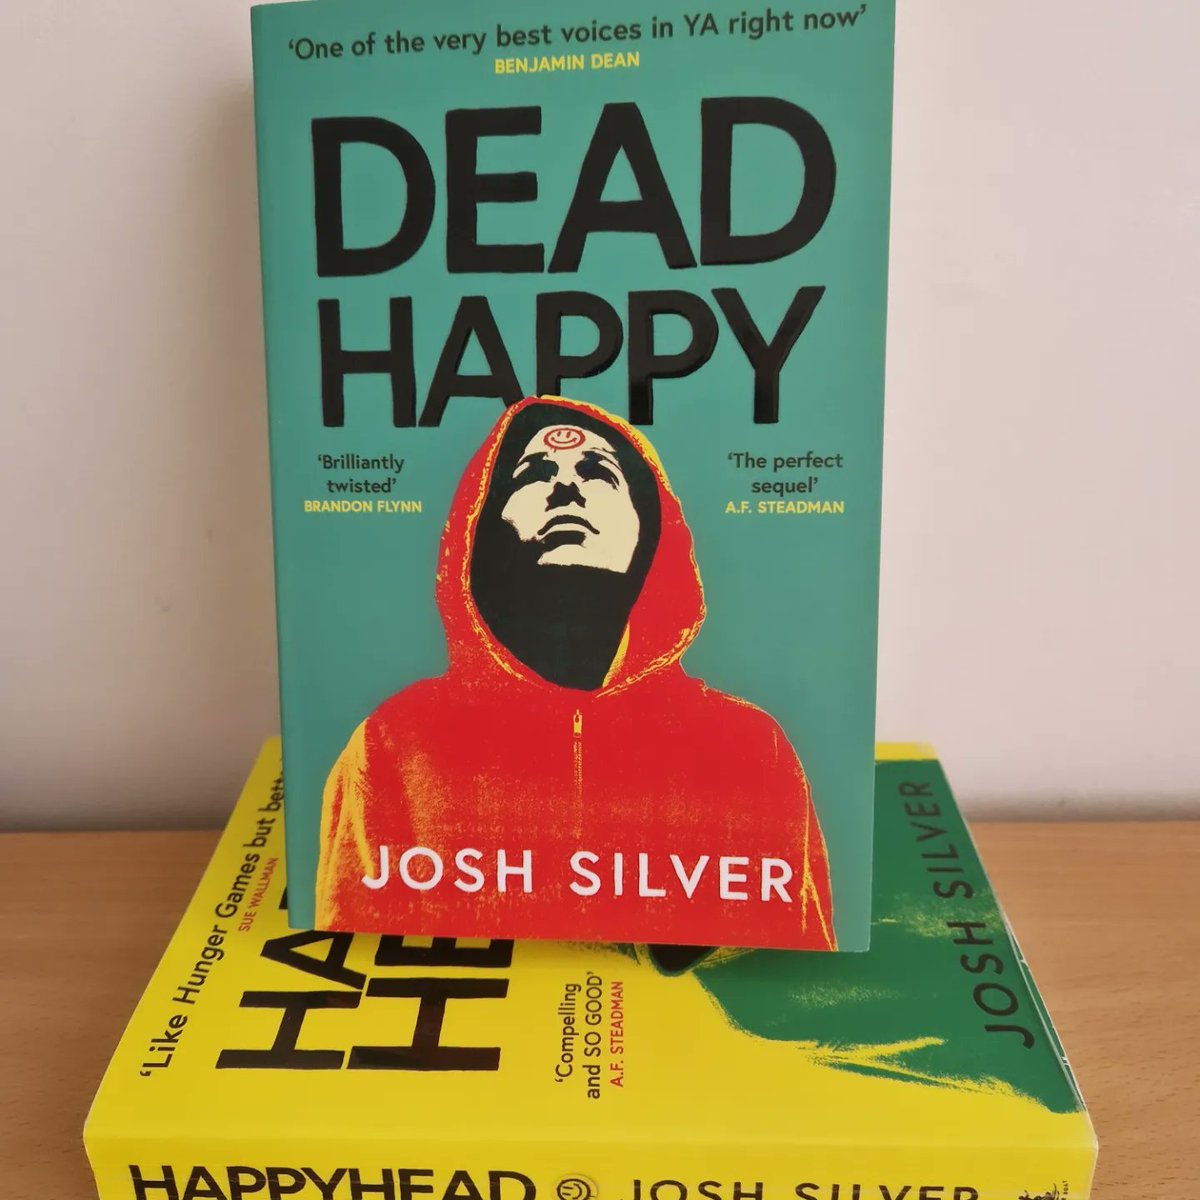 A fantastic evening at the book launch of Dead Happy by Josh Silver - the sequel to his amazing book Happy Head. Josh's passion around mental health shone through, what an informed, articulate and entertaining evening💛💚 @RocktheBoatNews